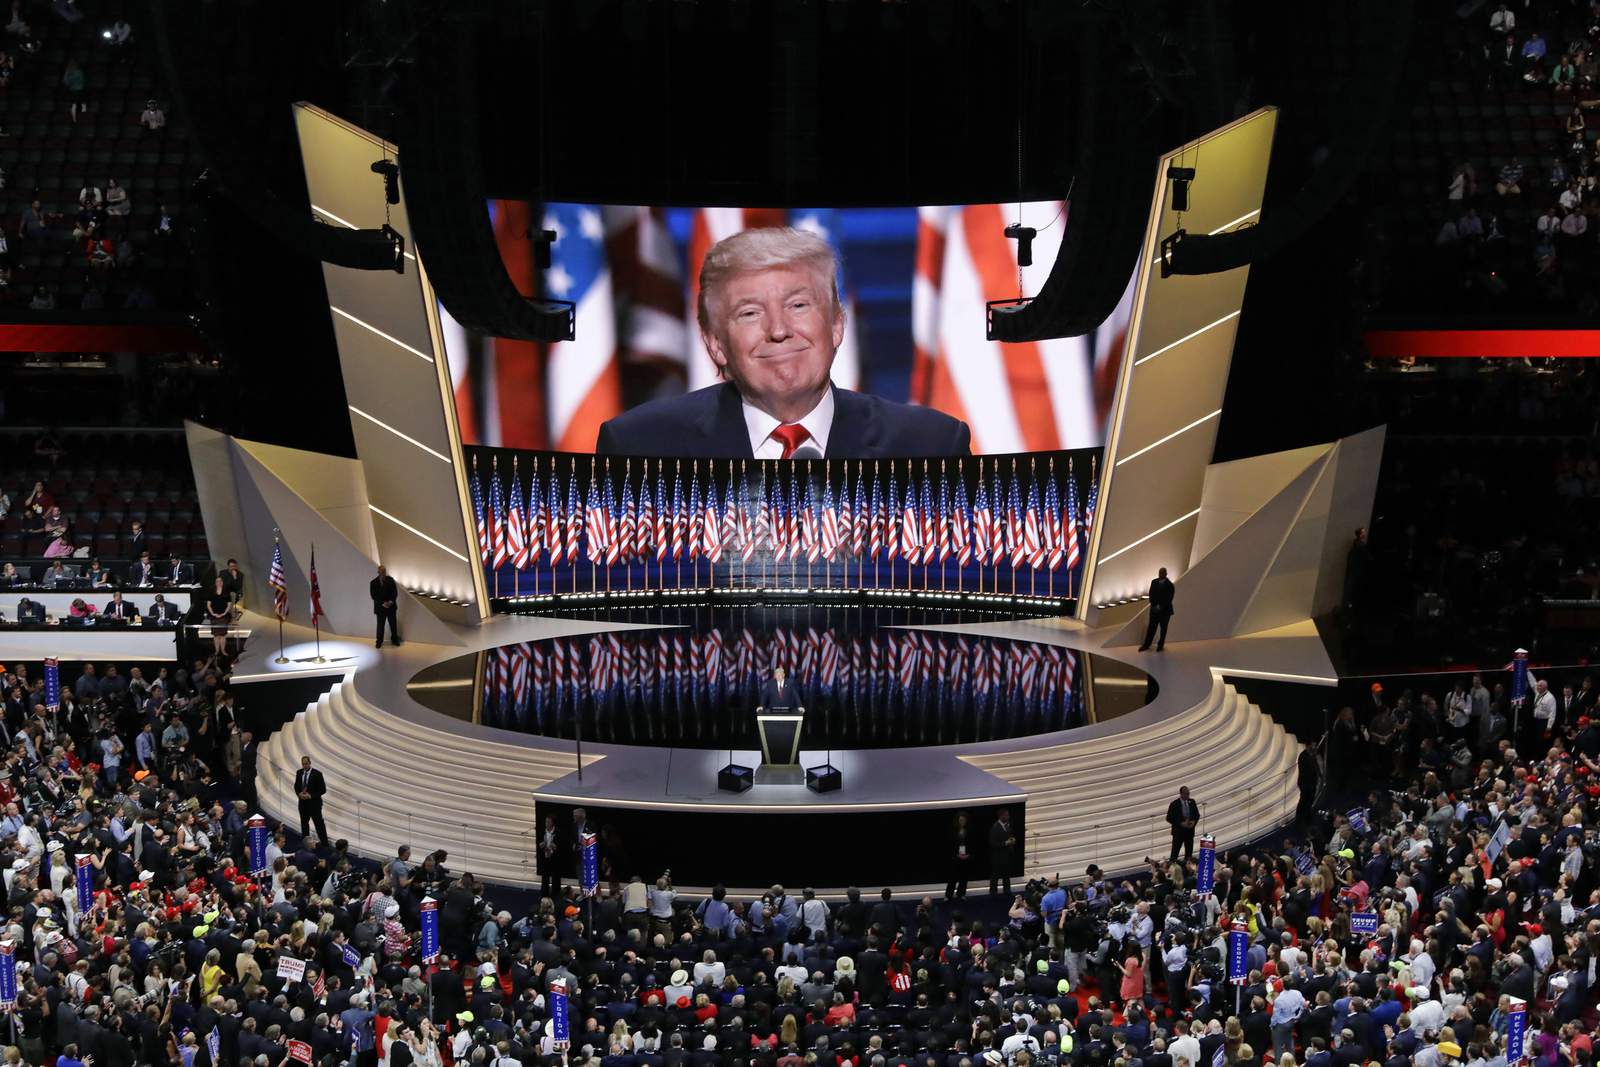 It's Trump's call on what the GOP convention will look like